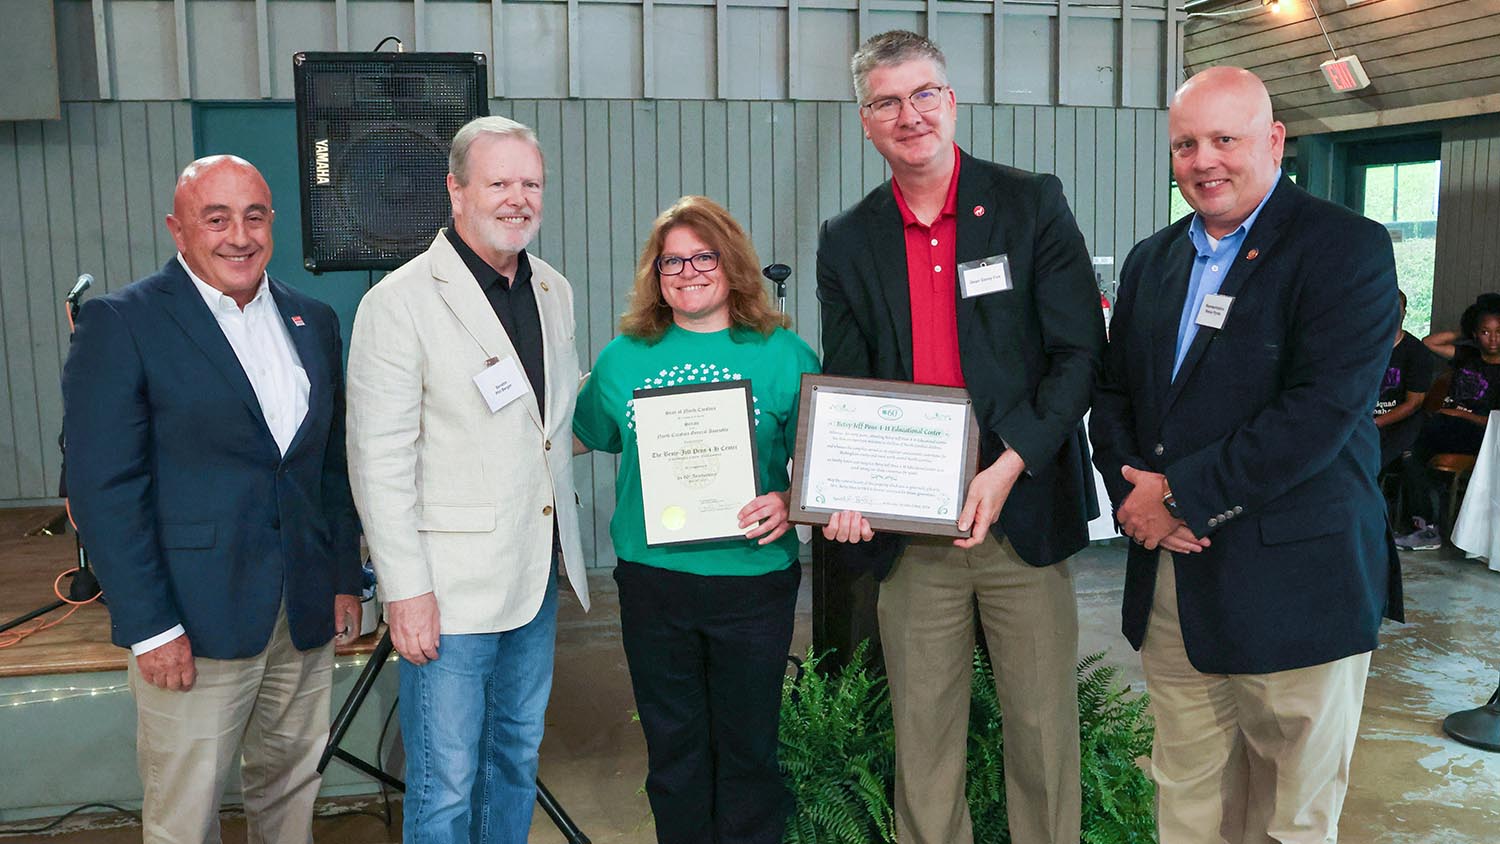 NC State Extension Director Rich Bonanno, state Senate Leader Phil Berger, Betsy-Jeff Penn 4-H Center Director Stacy Burns, CALS Dean Garey Fox, and North Carolina Rep. Reece Pyrtle with certificates presented to the center to commemorate the 60th anniversary.